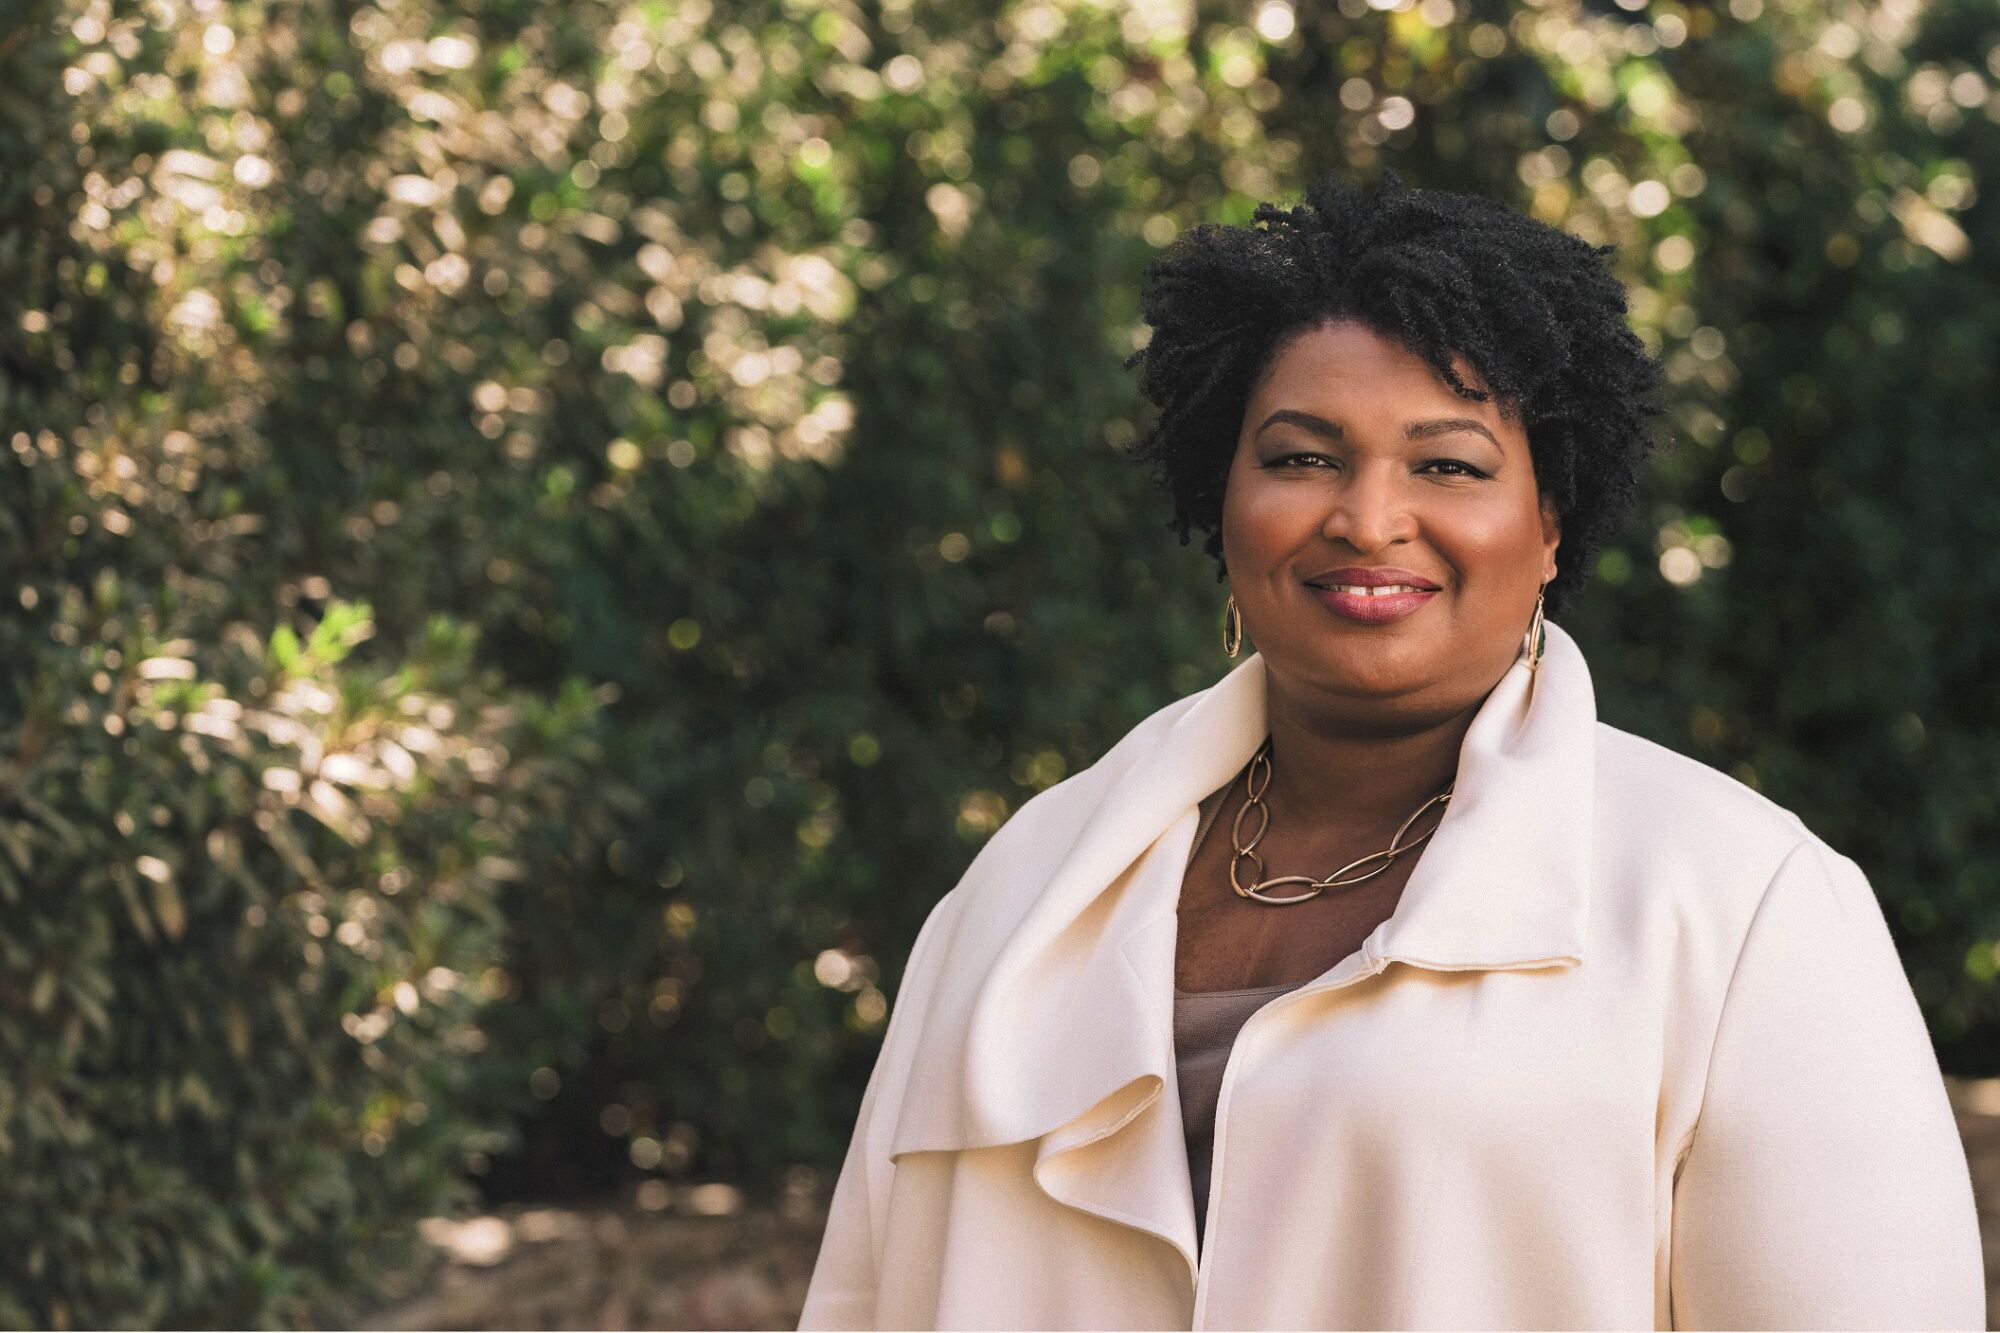 Stacey Abrams  smiles while standing in front of a group of trees and bushes.